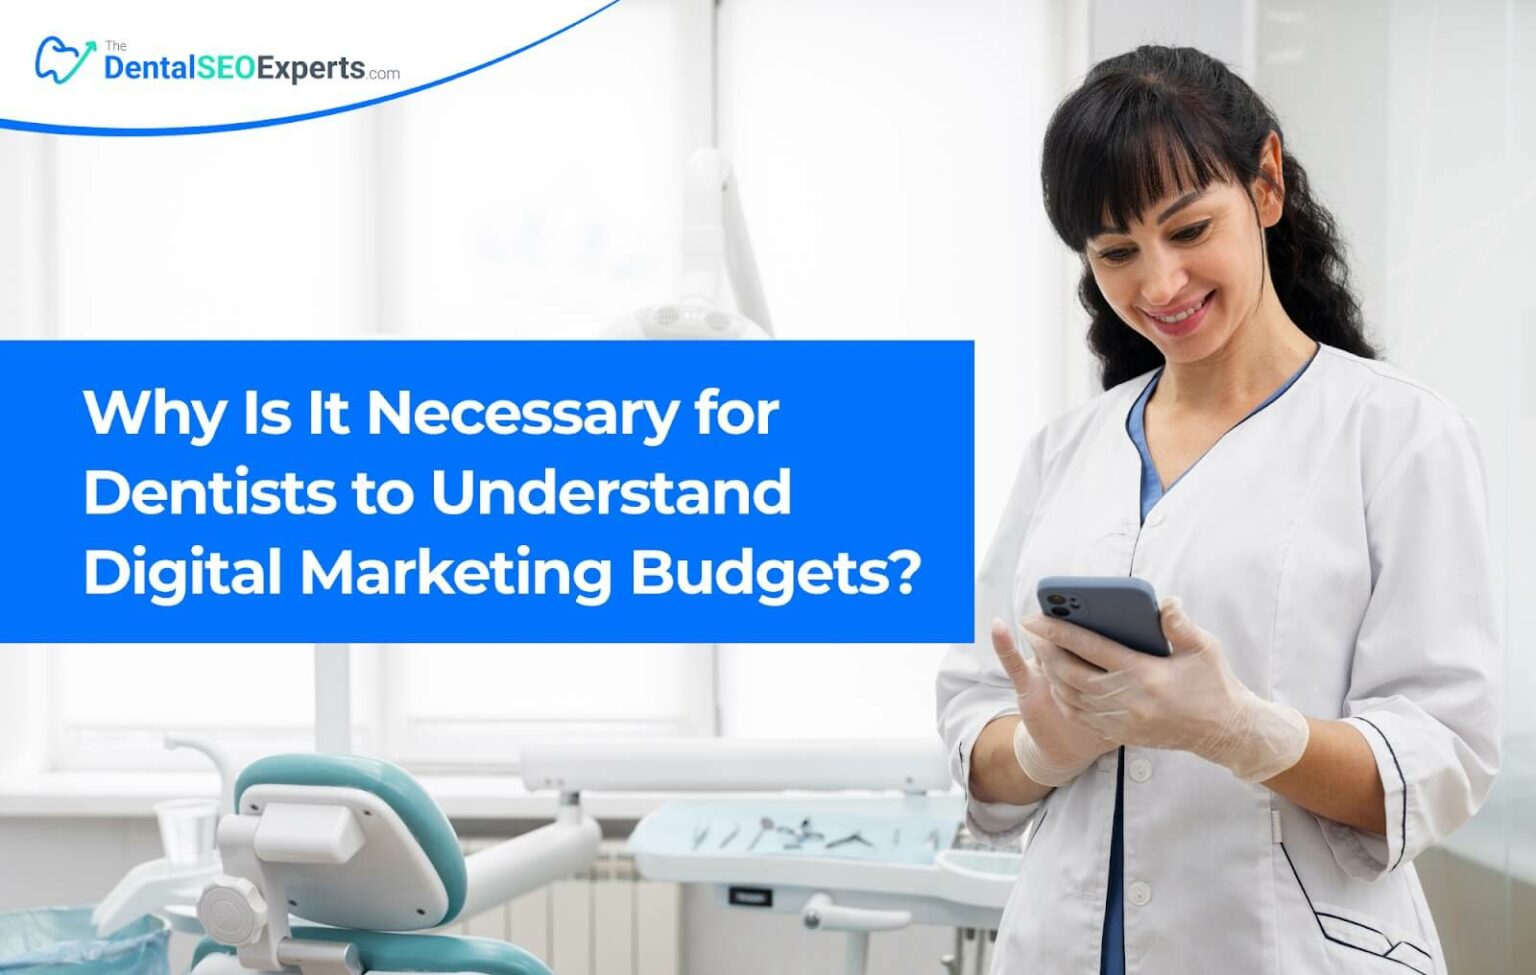 Why Is It Necessary for Dentists to Understand Digital Marketing Budgets